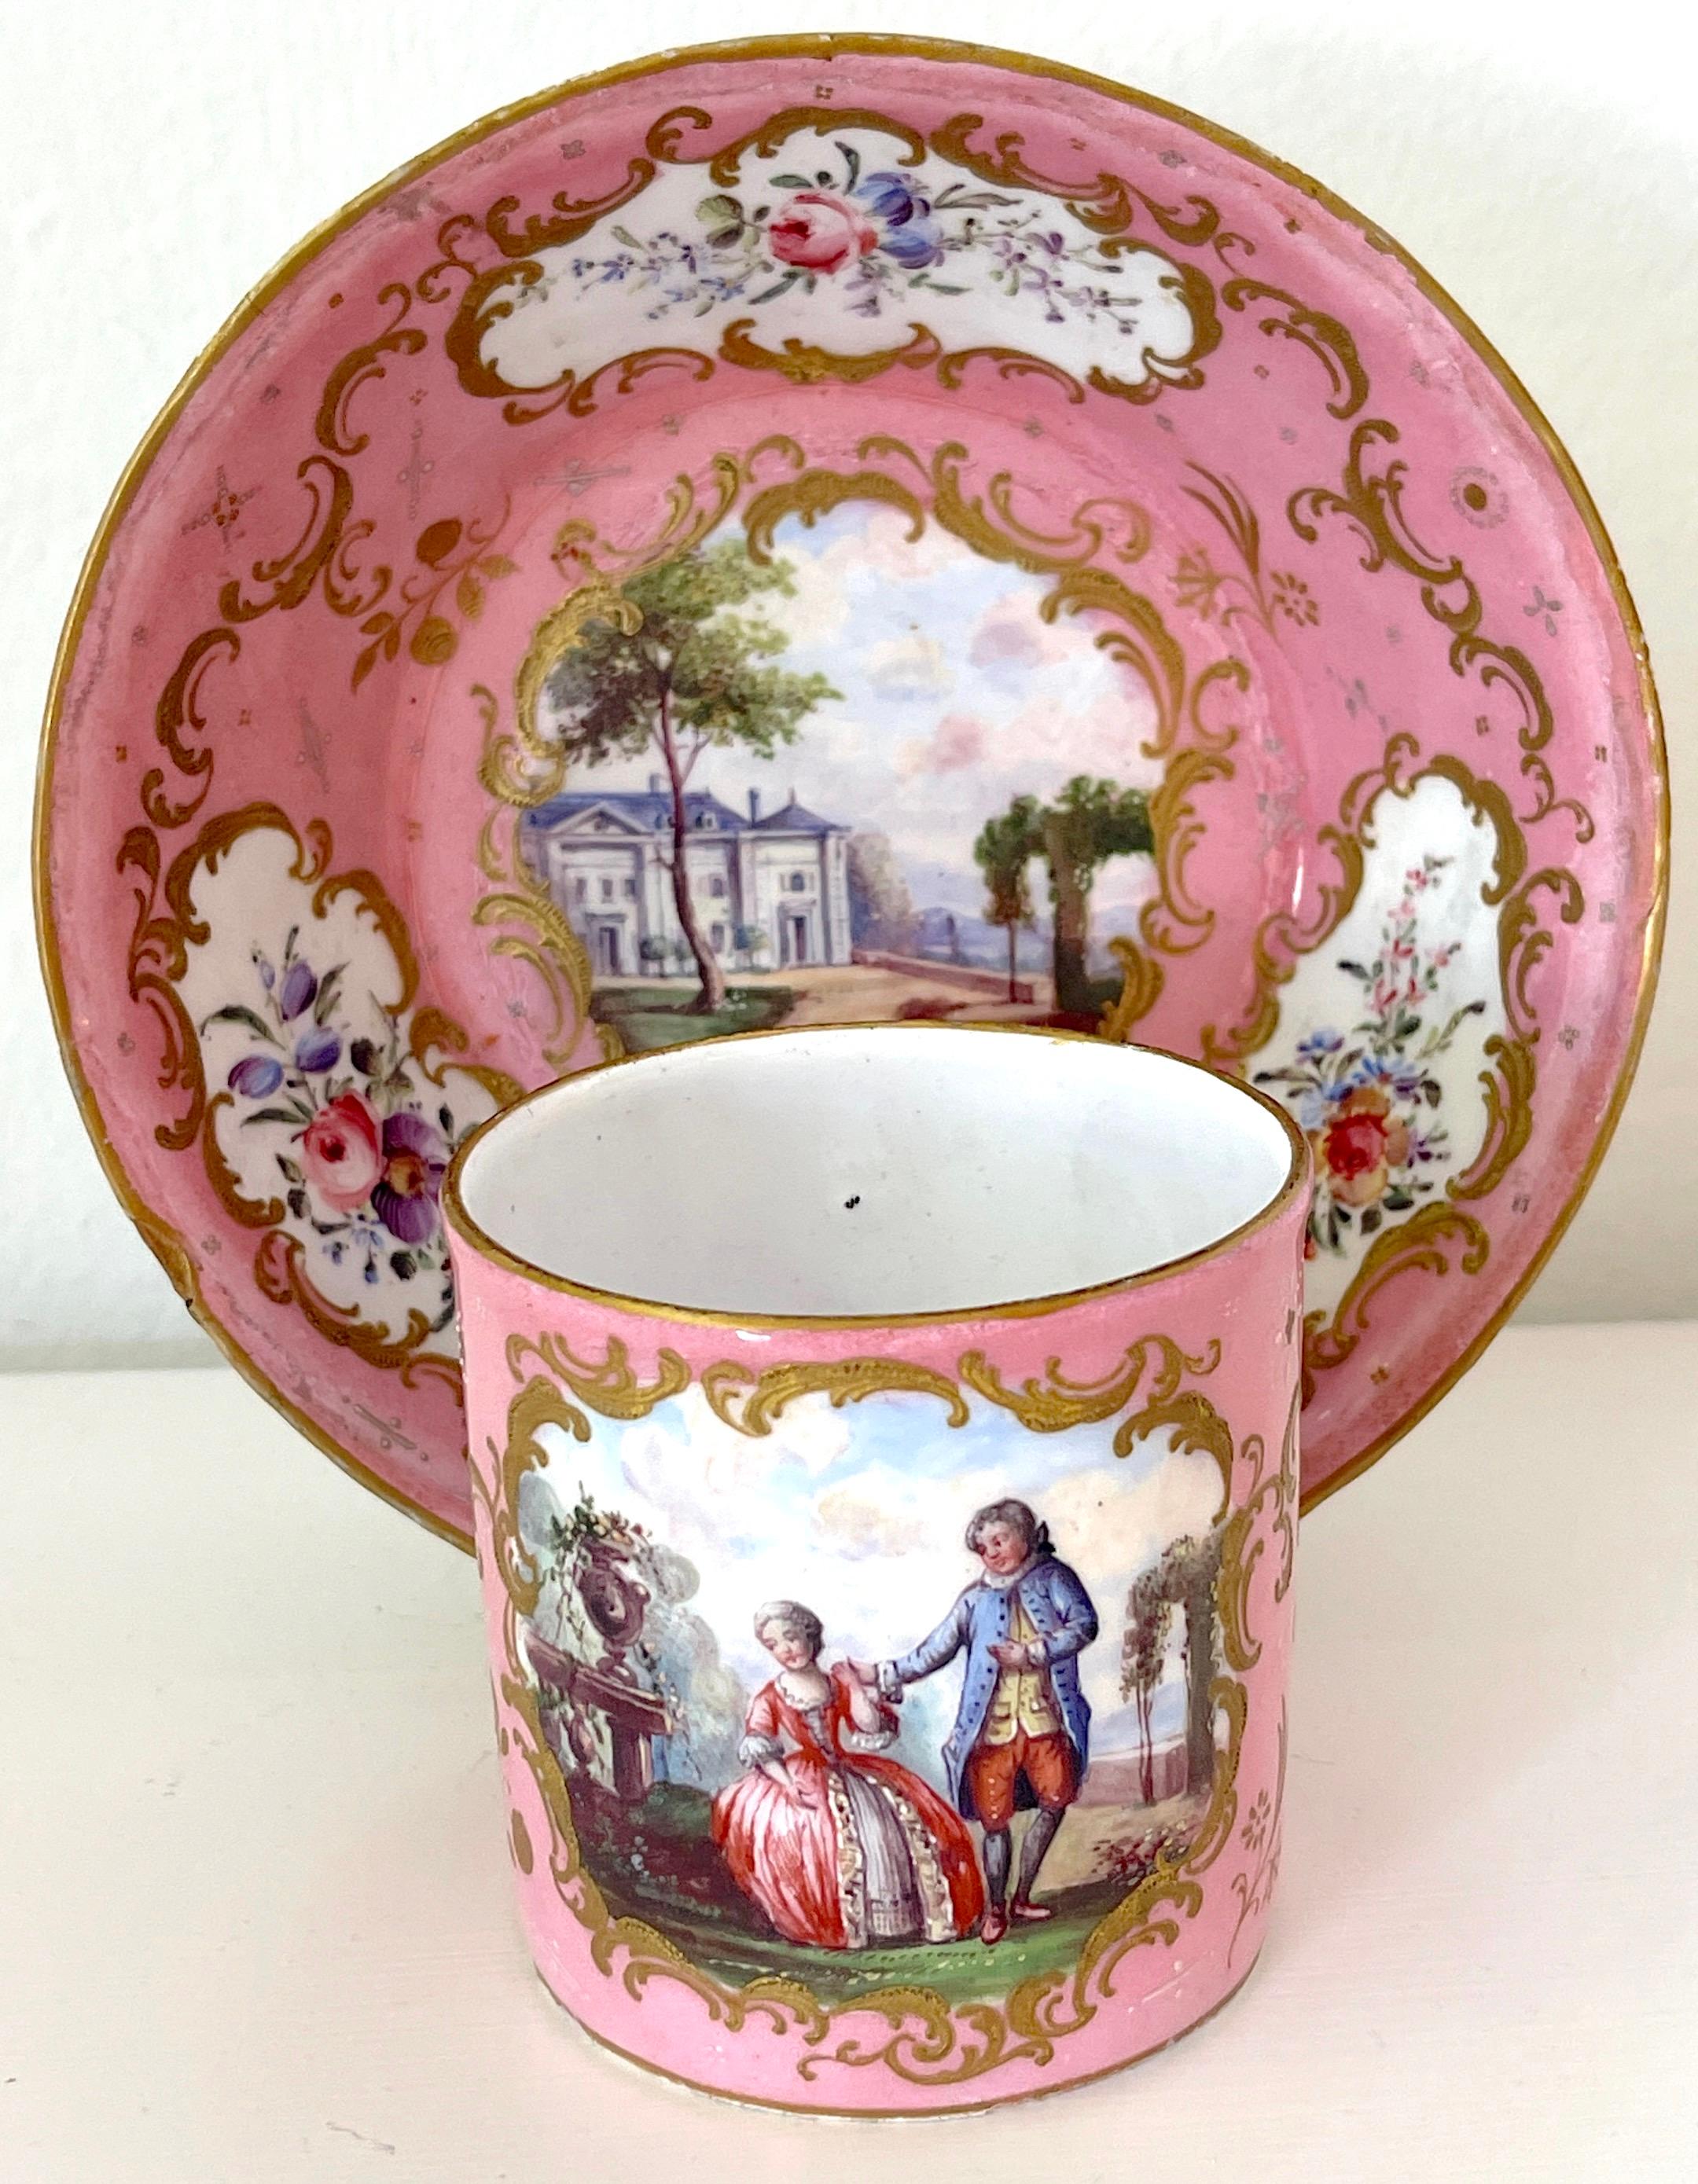 18th century English Rocco Battersea & Porcelain Companion Cup & Saucer, Unique
Both pieces made in England Mid 18th Century
The Cup attributed to the Chelsea or Bow Porcelain Works
The Saucer attributed to the Battersea enamel Works

The cup